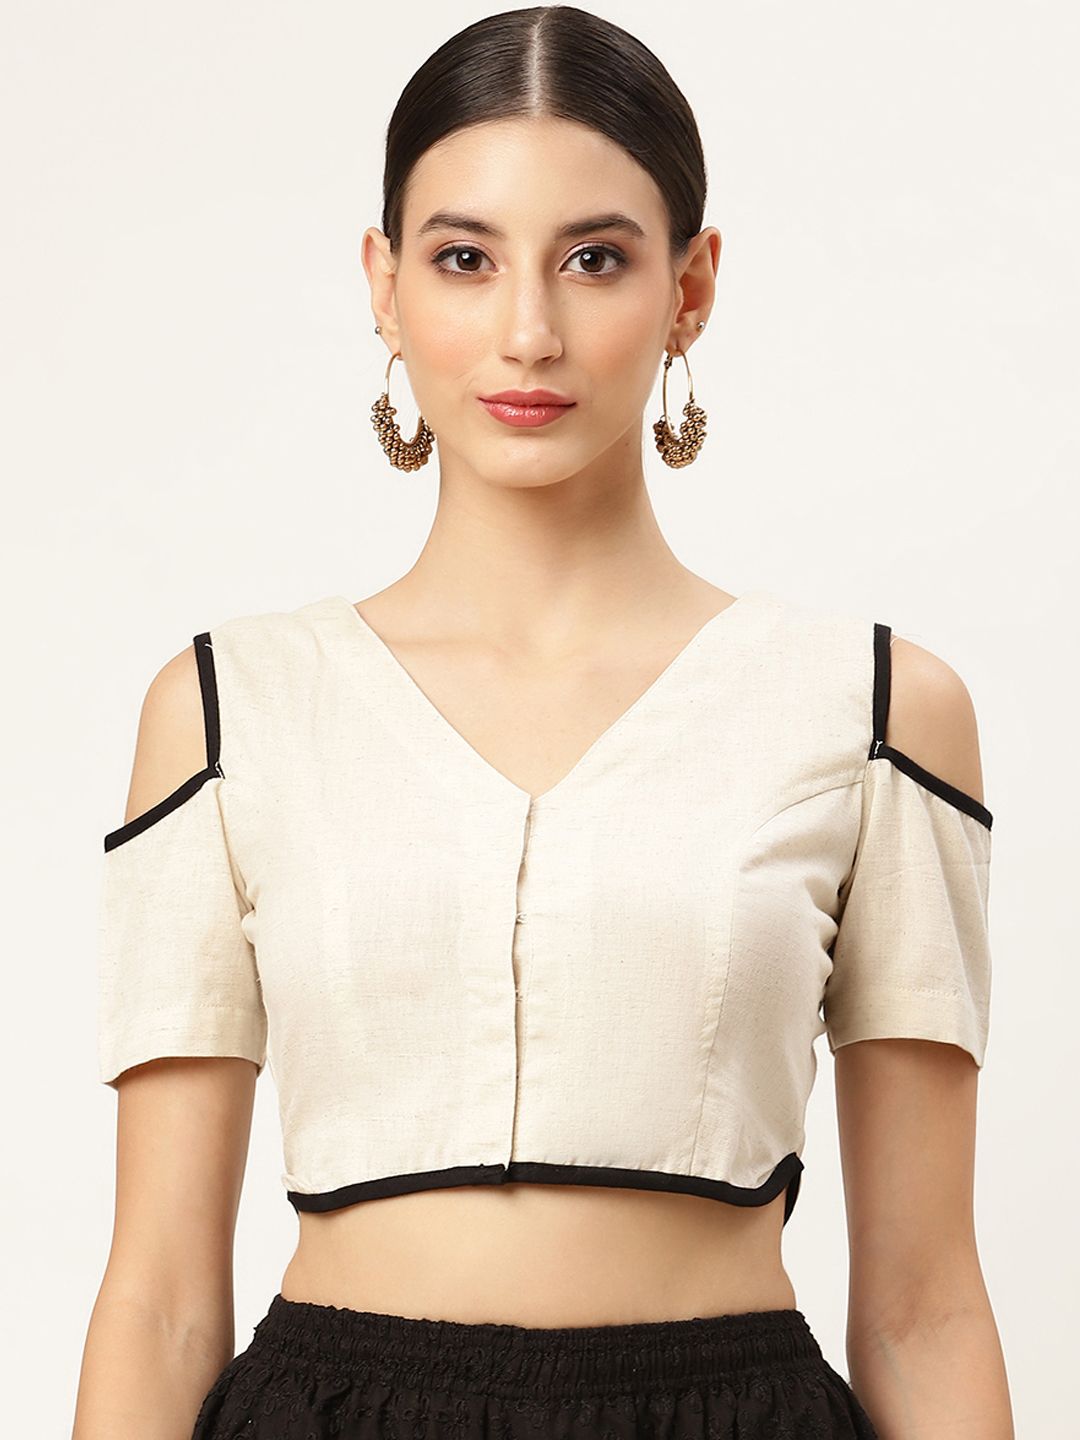 Molcha Women White Solid Cotton Saree Blouse with Cold-Shoulder Sleeves Price in India